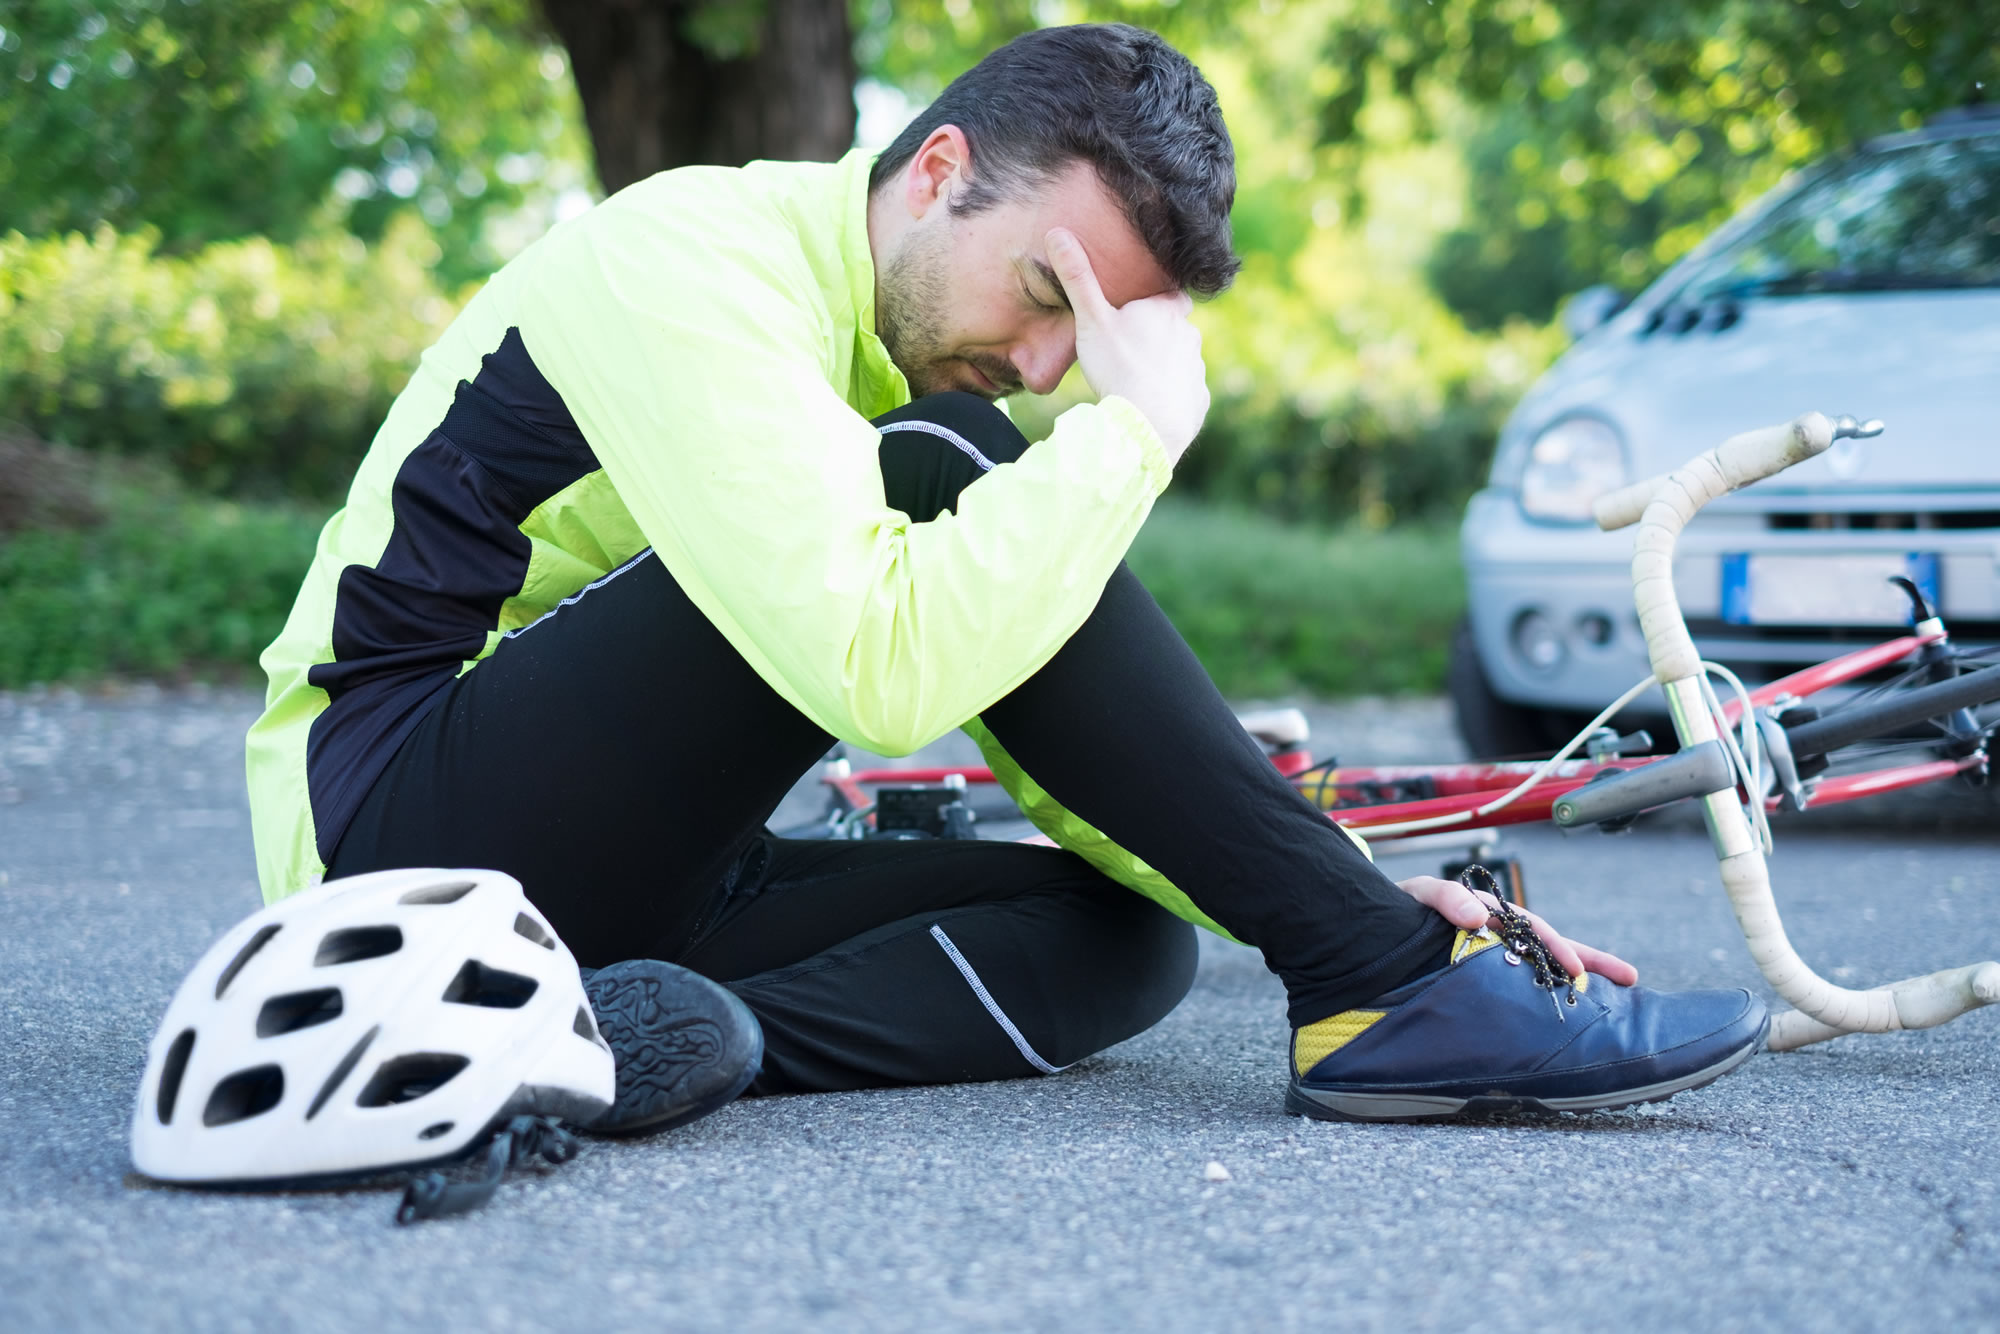 Bicycle Crash Compensation - Accident Claim Specialists / No Win, No Fee / Chester Personal Injury Claim Lawyers